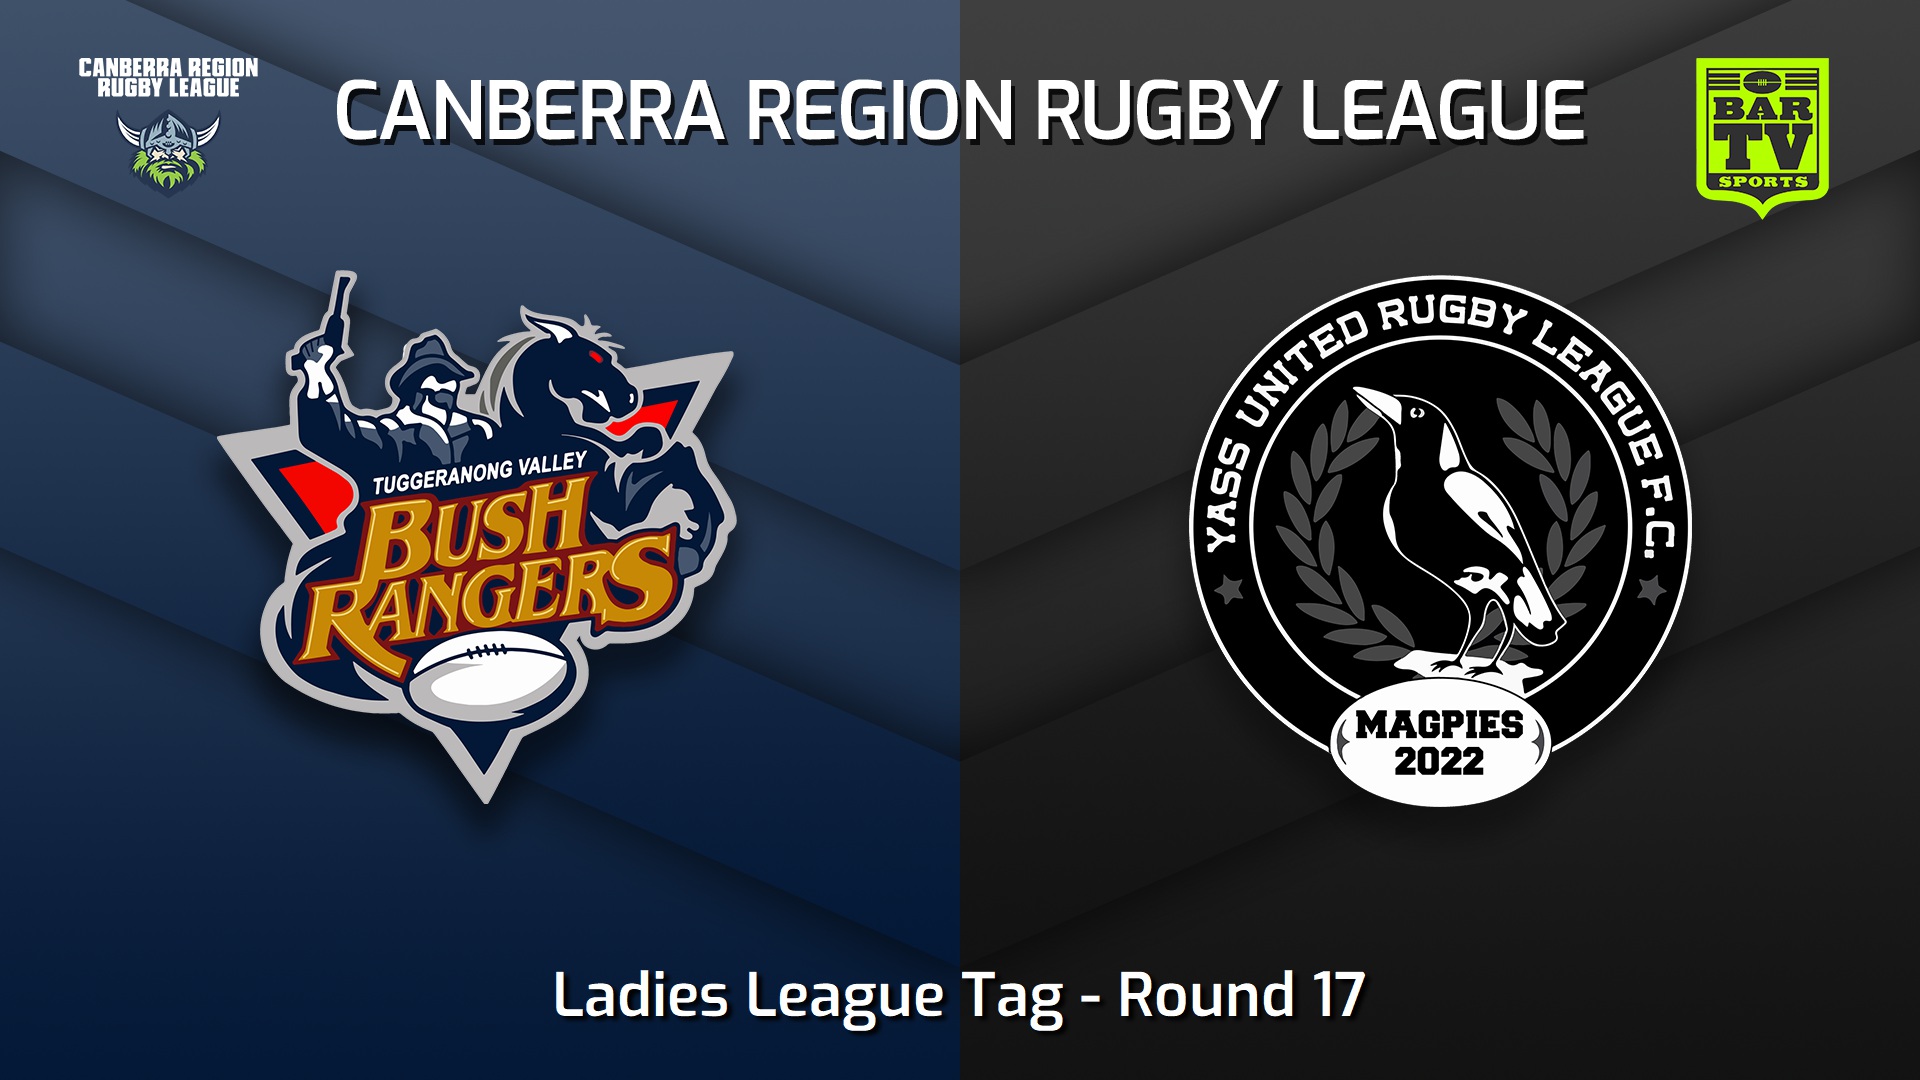 Canberra Round 17 - Ladies League Tag